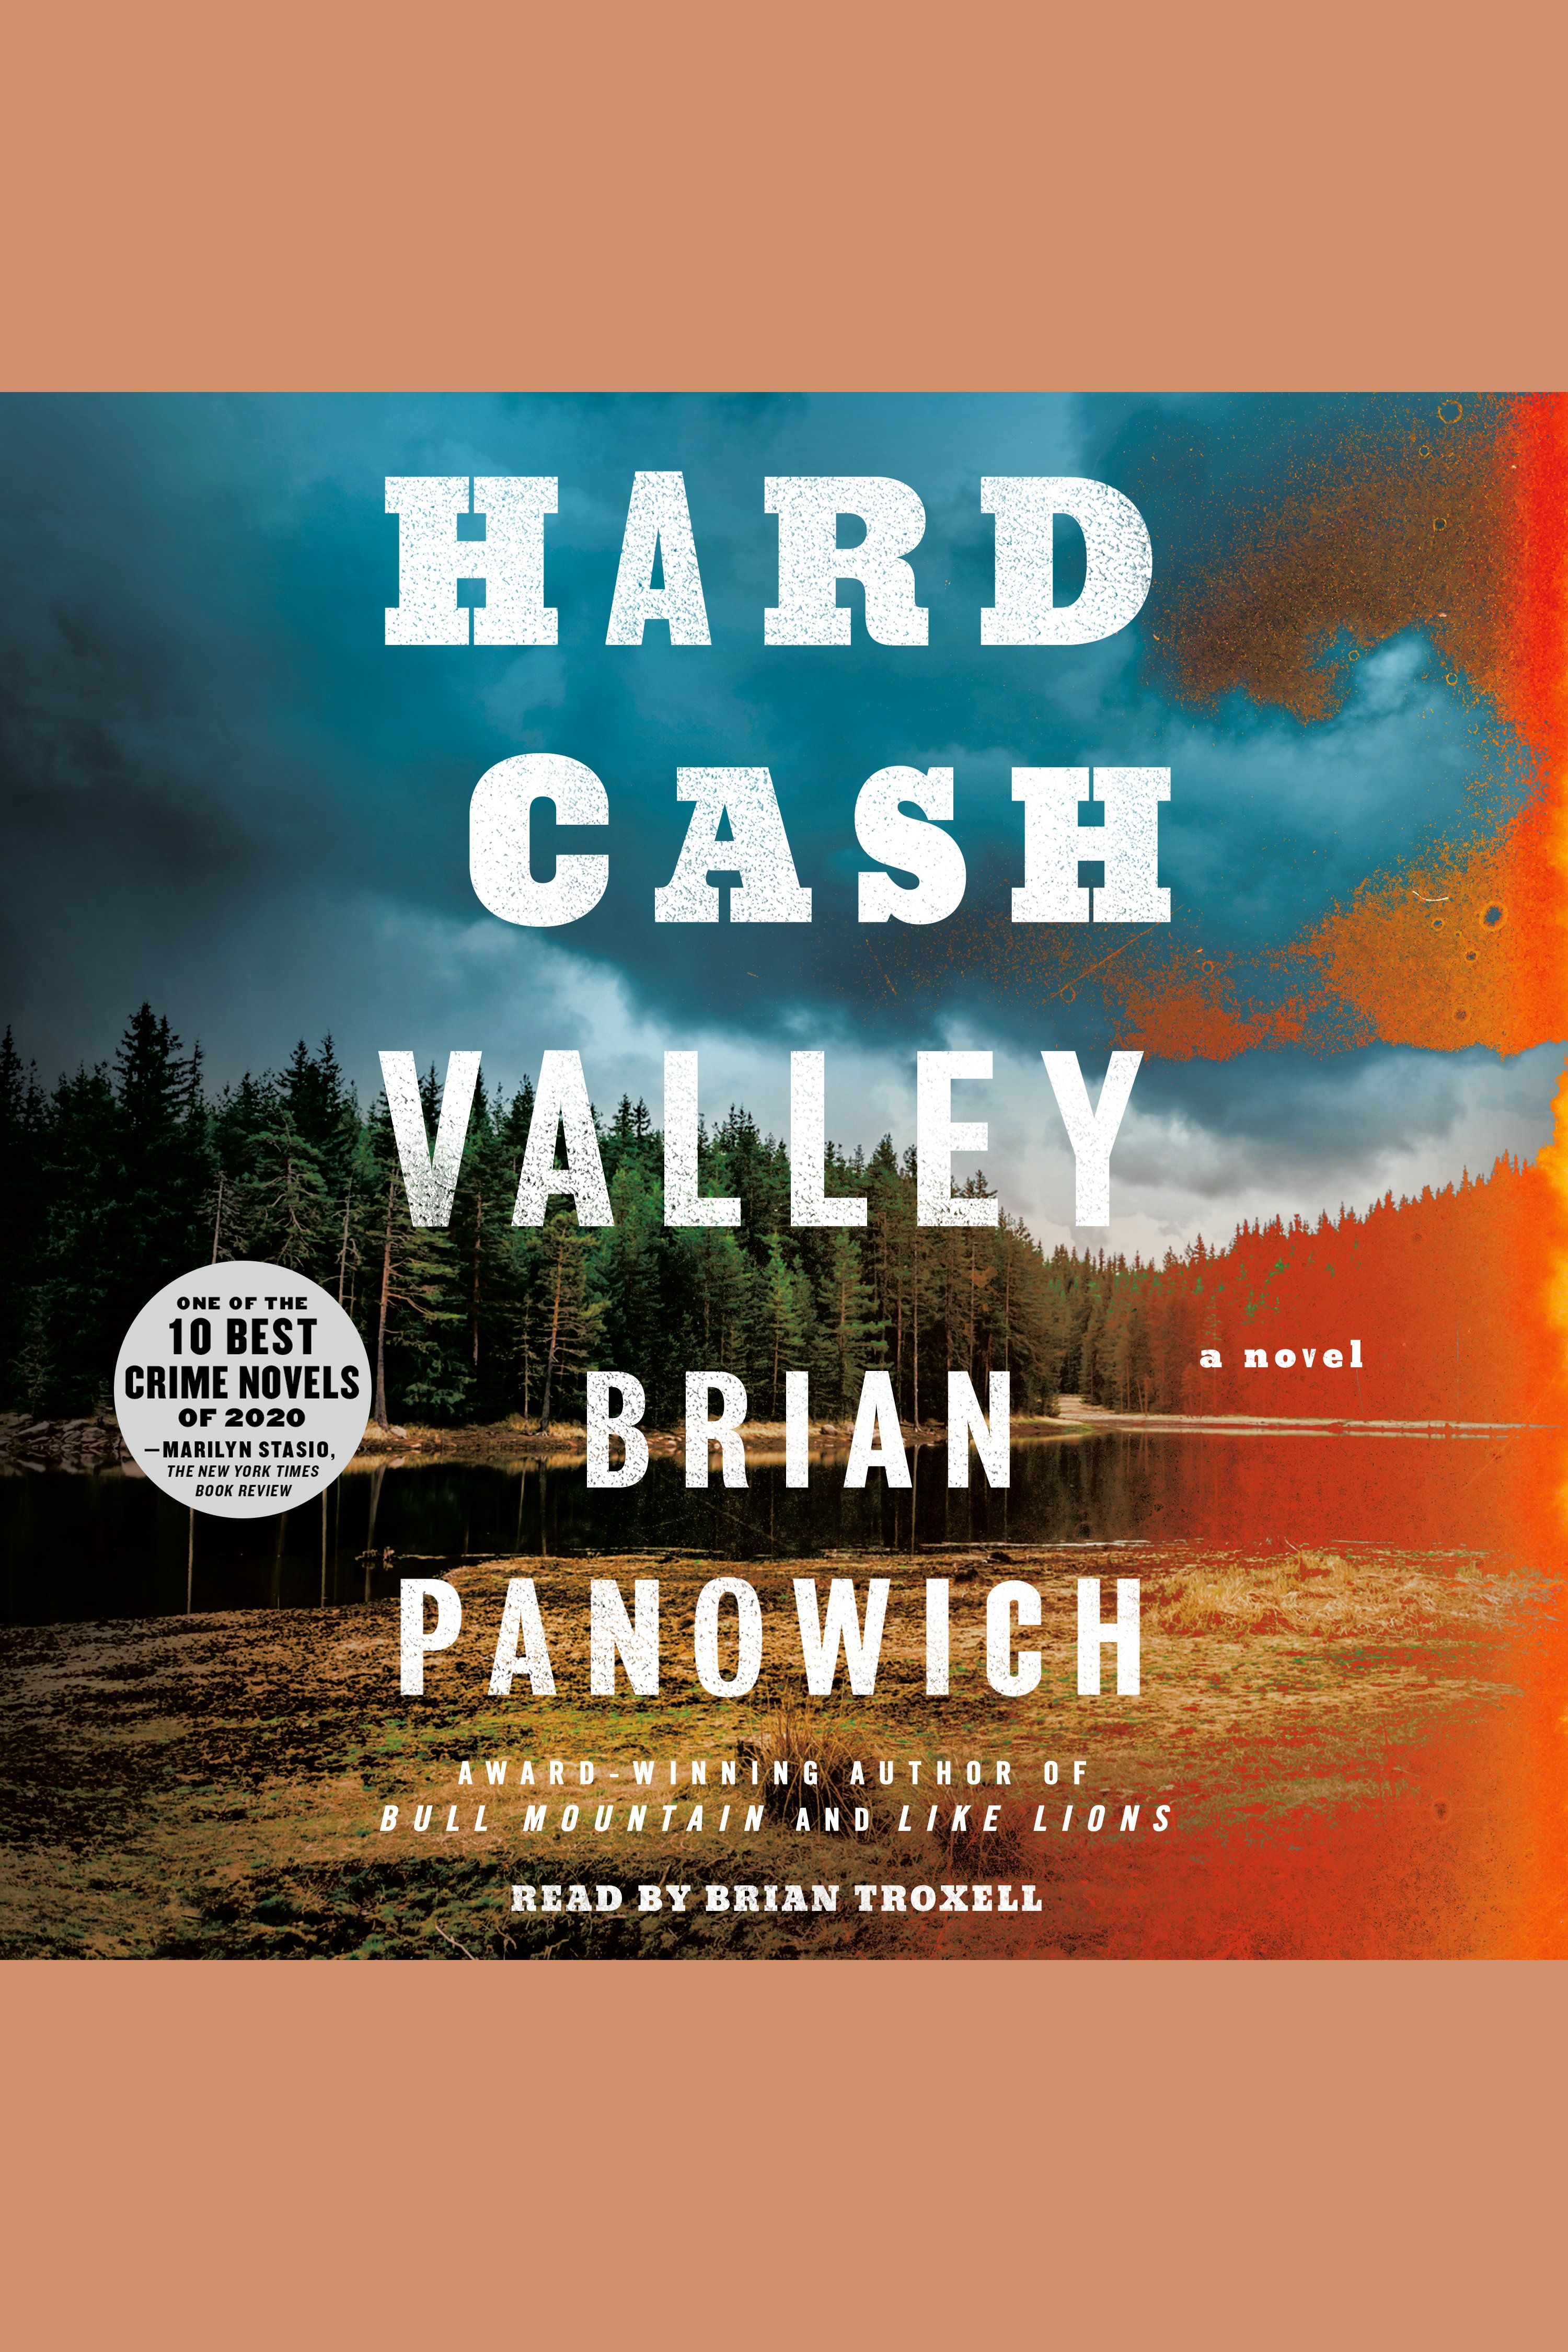 Hard Cash Valley cover image